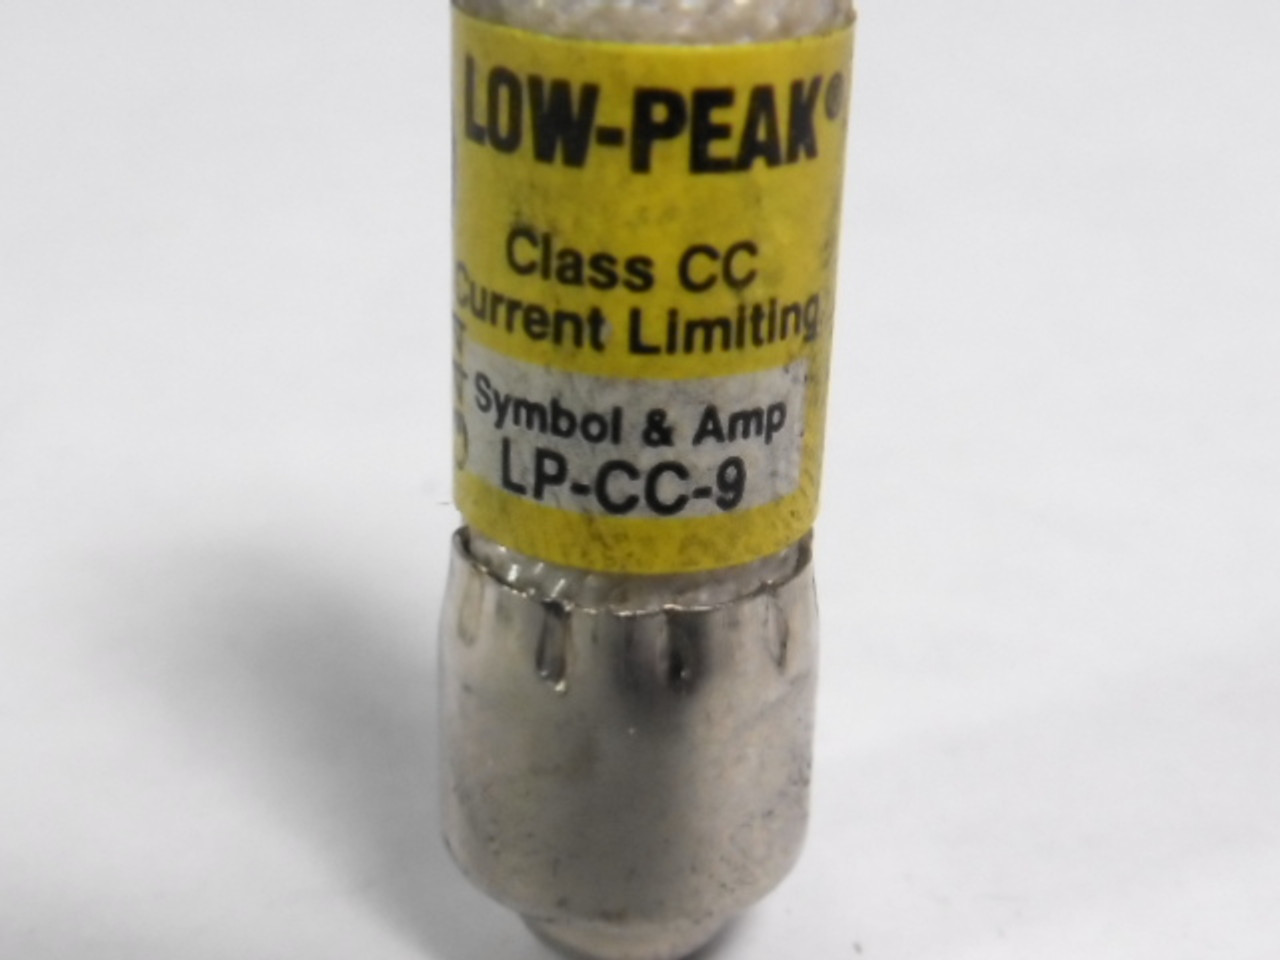 Low-Peak LP-CC-9 Current Limiting Fuse 9A 600V USED